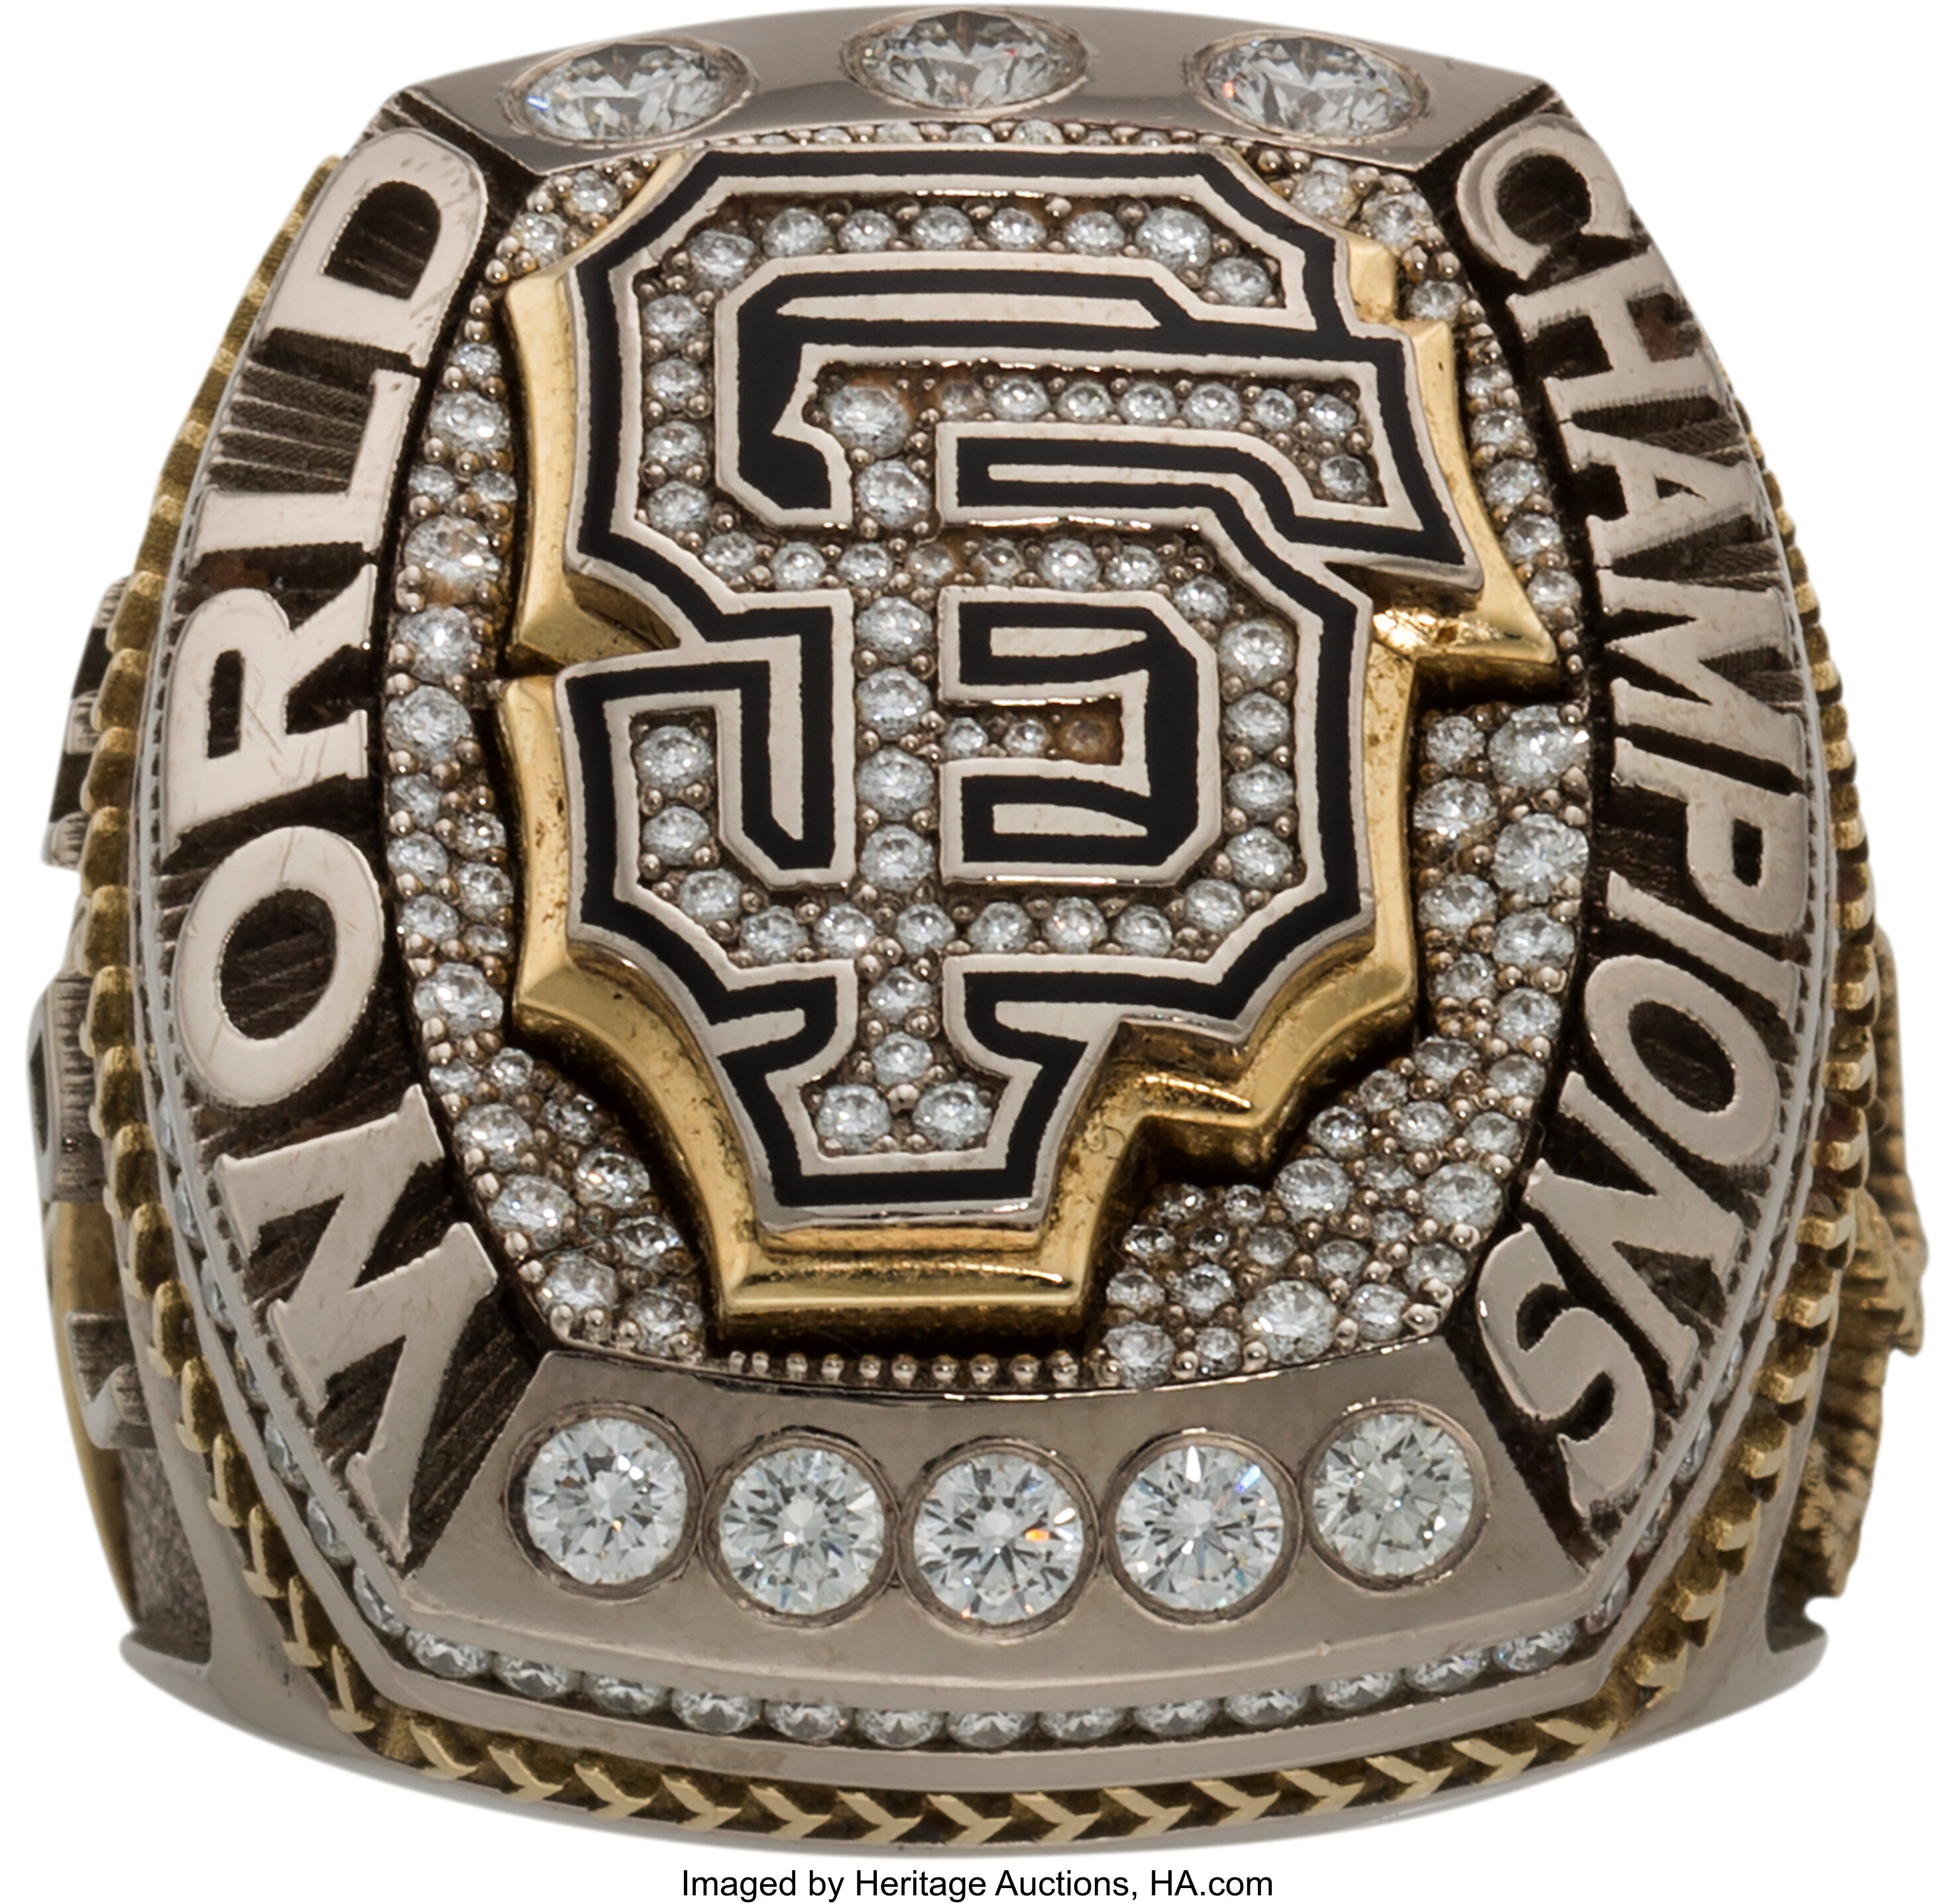 Giants get their 2014 World Series Rings - Mangin Photography Archive